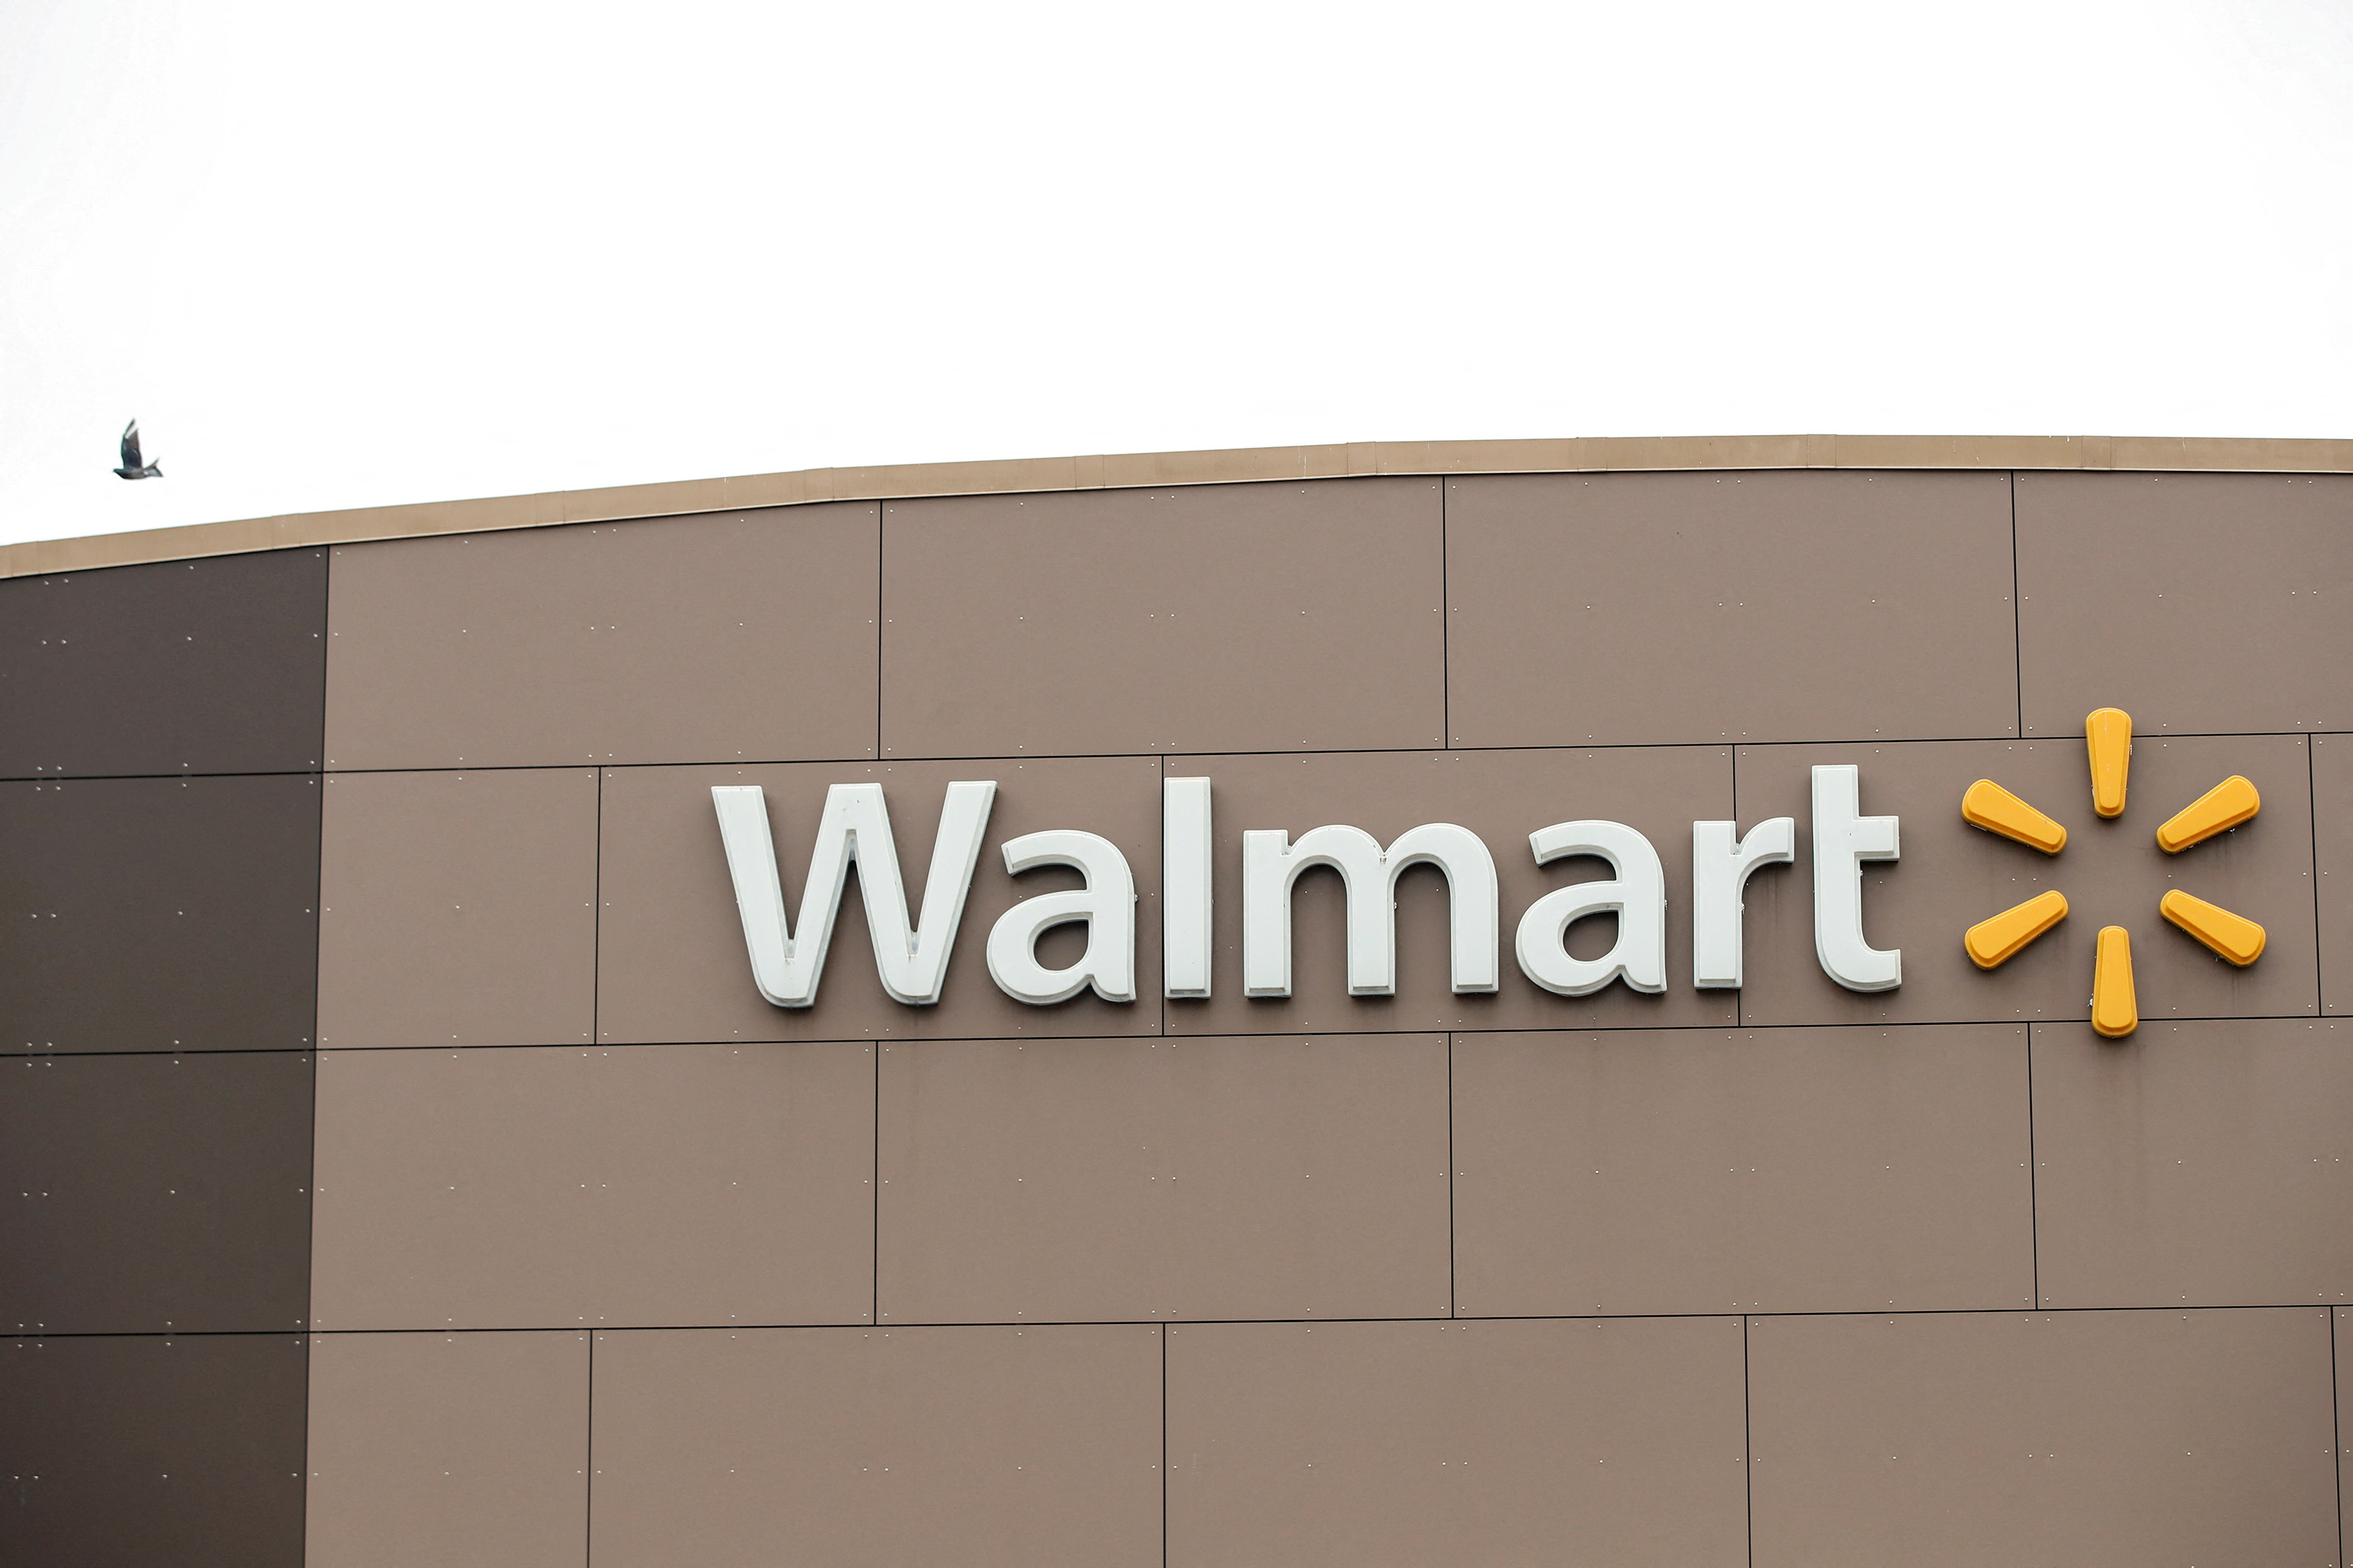 Walmart says it's streamlining job titles, pay changes for corporate